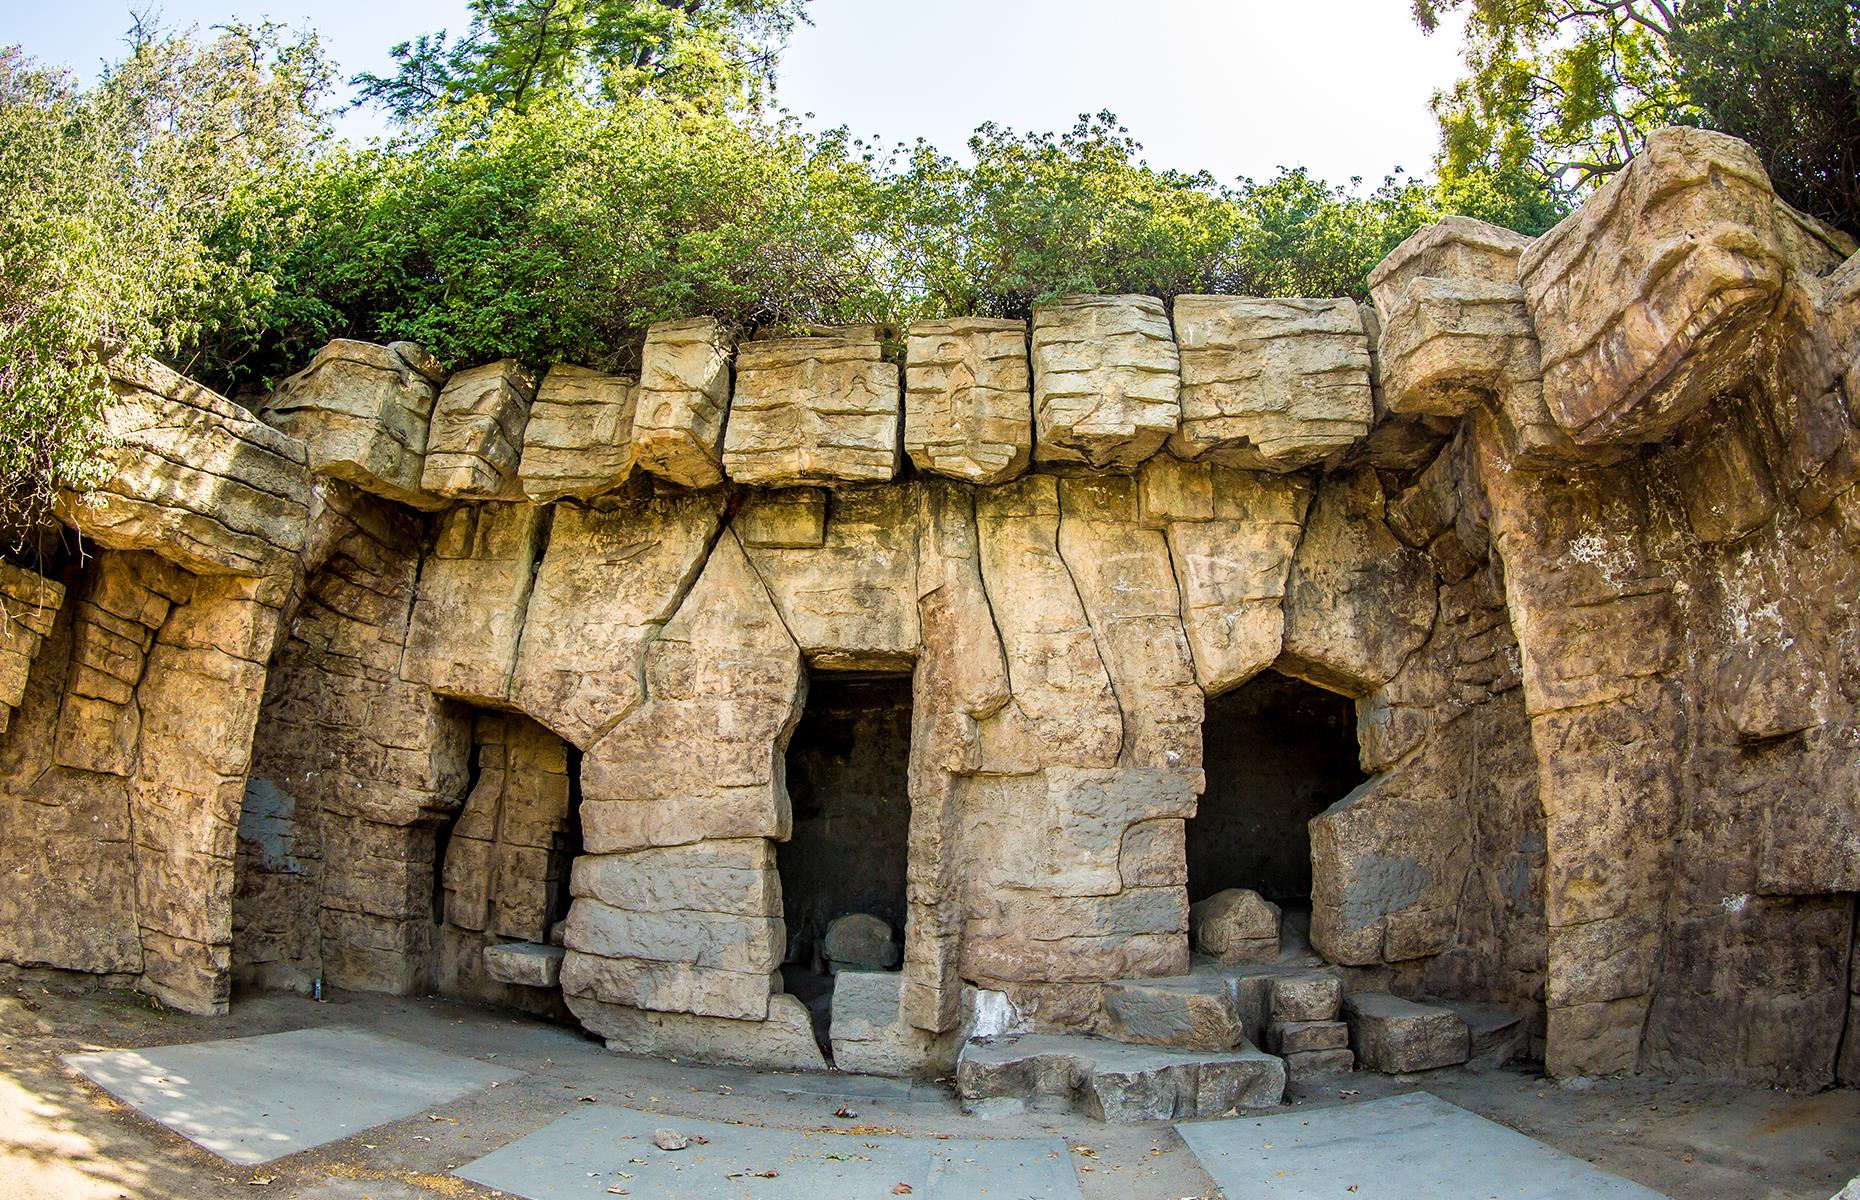 The remains of the original Los Angeles Zoo form a fascinating portion of Griffith Park. The once-beloved zoo – home to animals like lions, bears and monkeys – was founded in 1912 and existed right up until the 1960s, when it moved to its modern location. Today the rocky walls, abandoned cages and grottos, built in the 1930s, are home to trails and picnic areas.